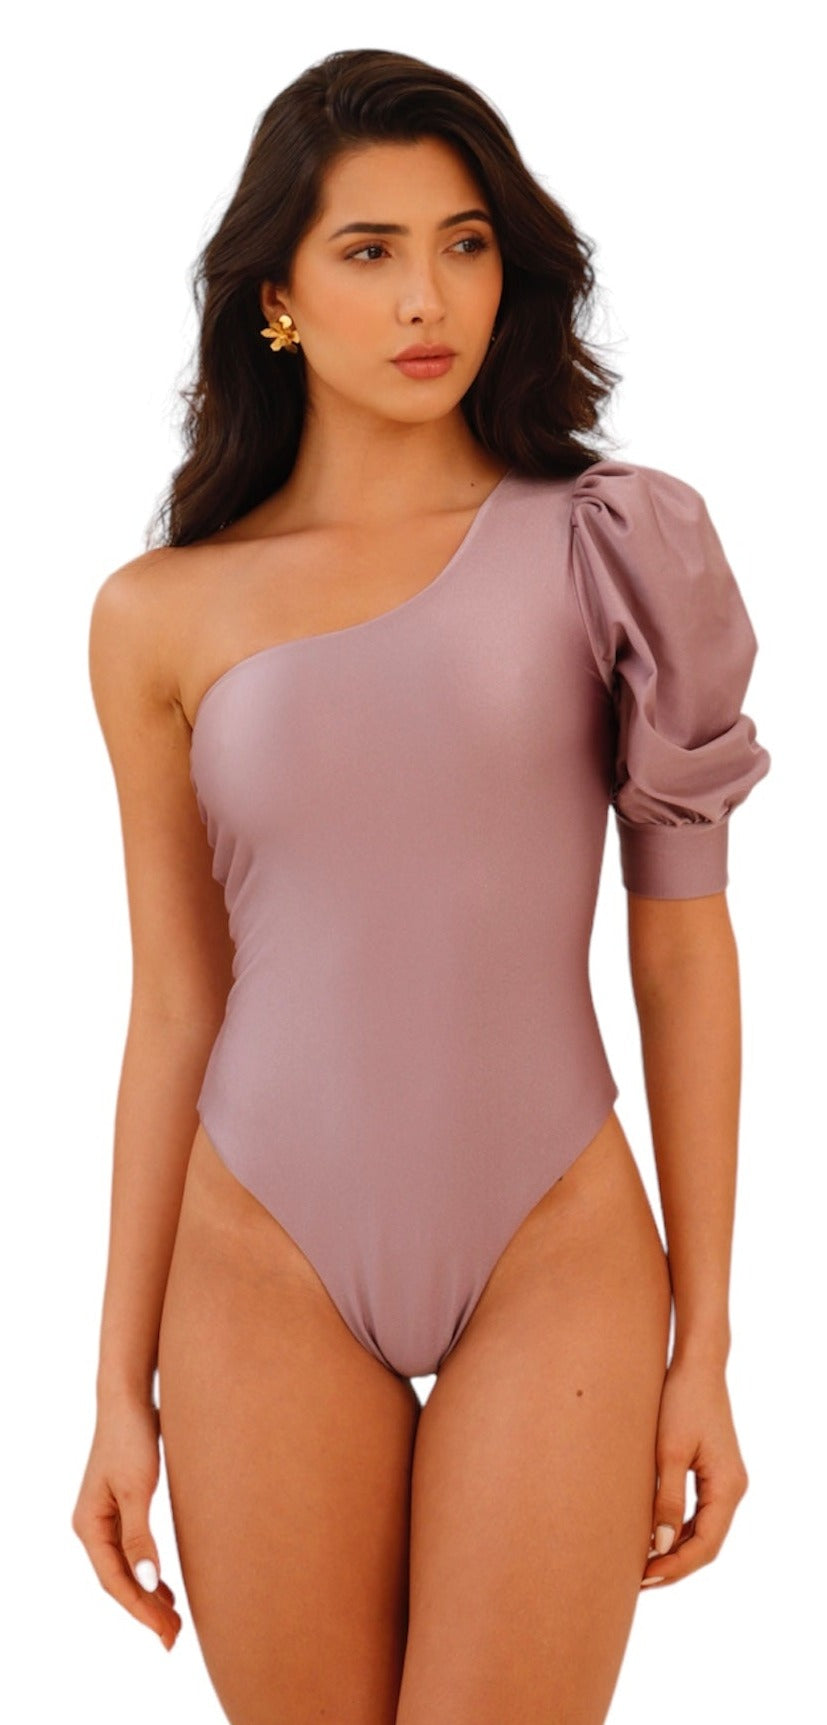 Milano One Piece Swimsuit - Puff Sleeve One-Shoulder Top - High-cut Bottom  - Lilac - Small